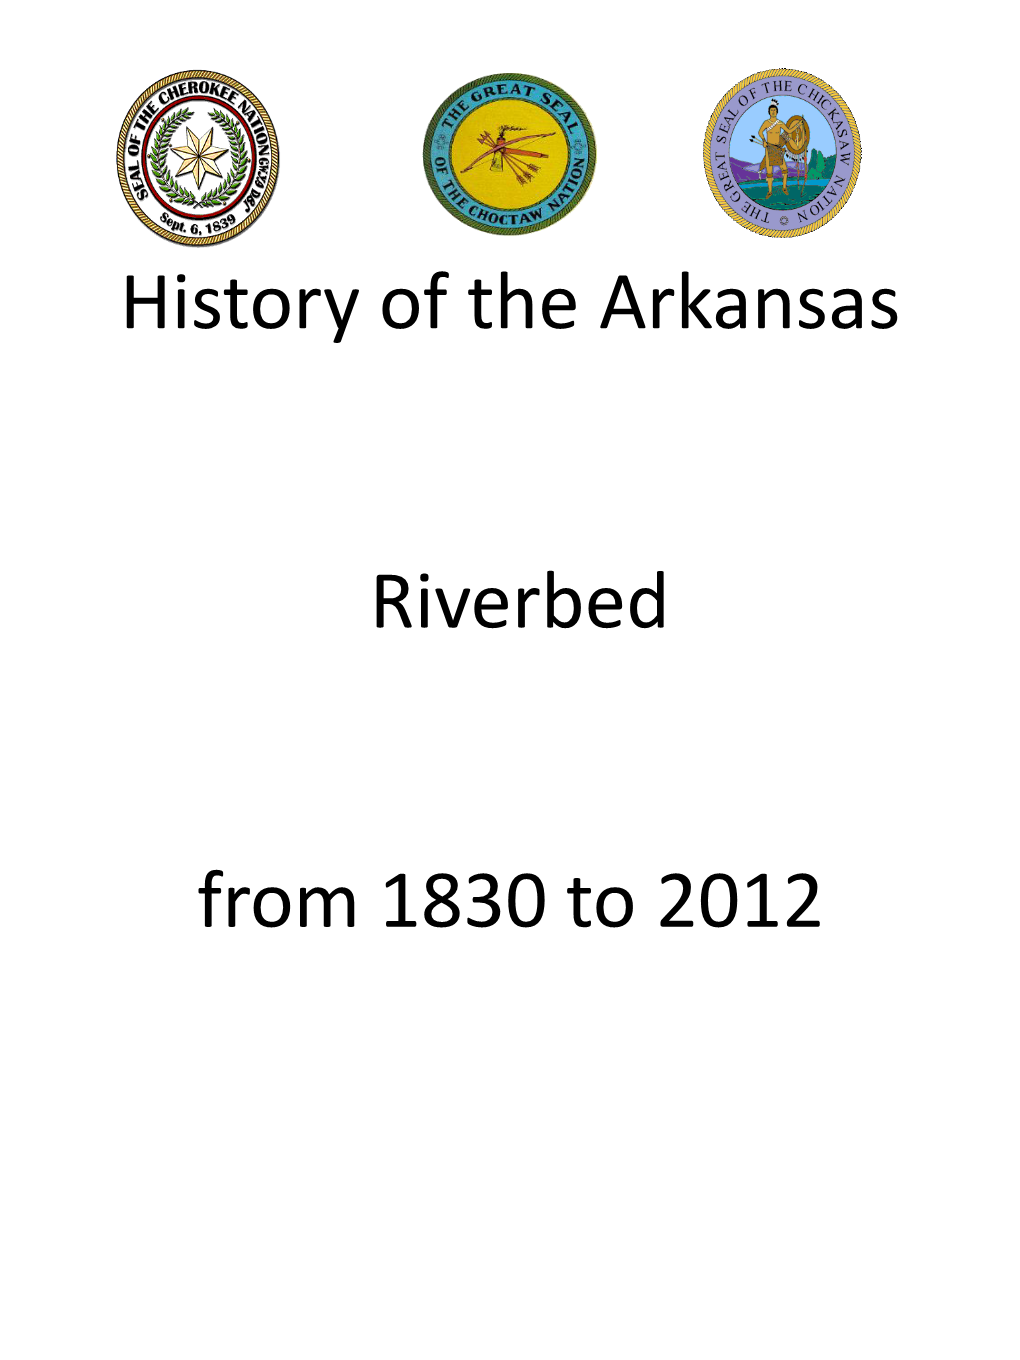 History of the Arkansas Riverbed from 1830 to 2011